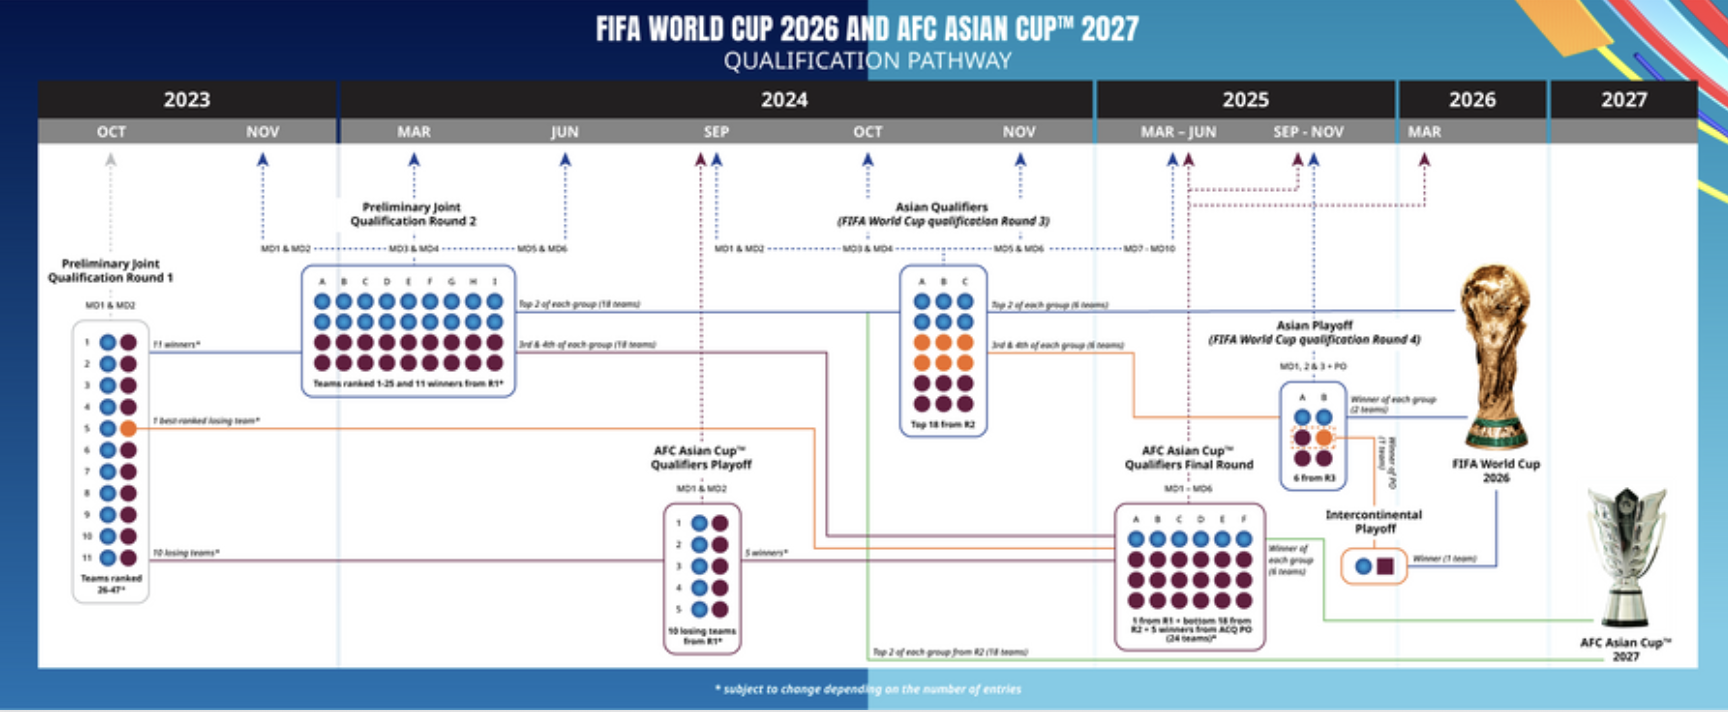 World Cup 2022: How many teams qualify from each group?